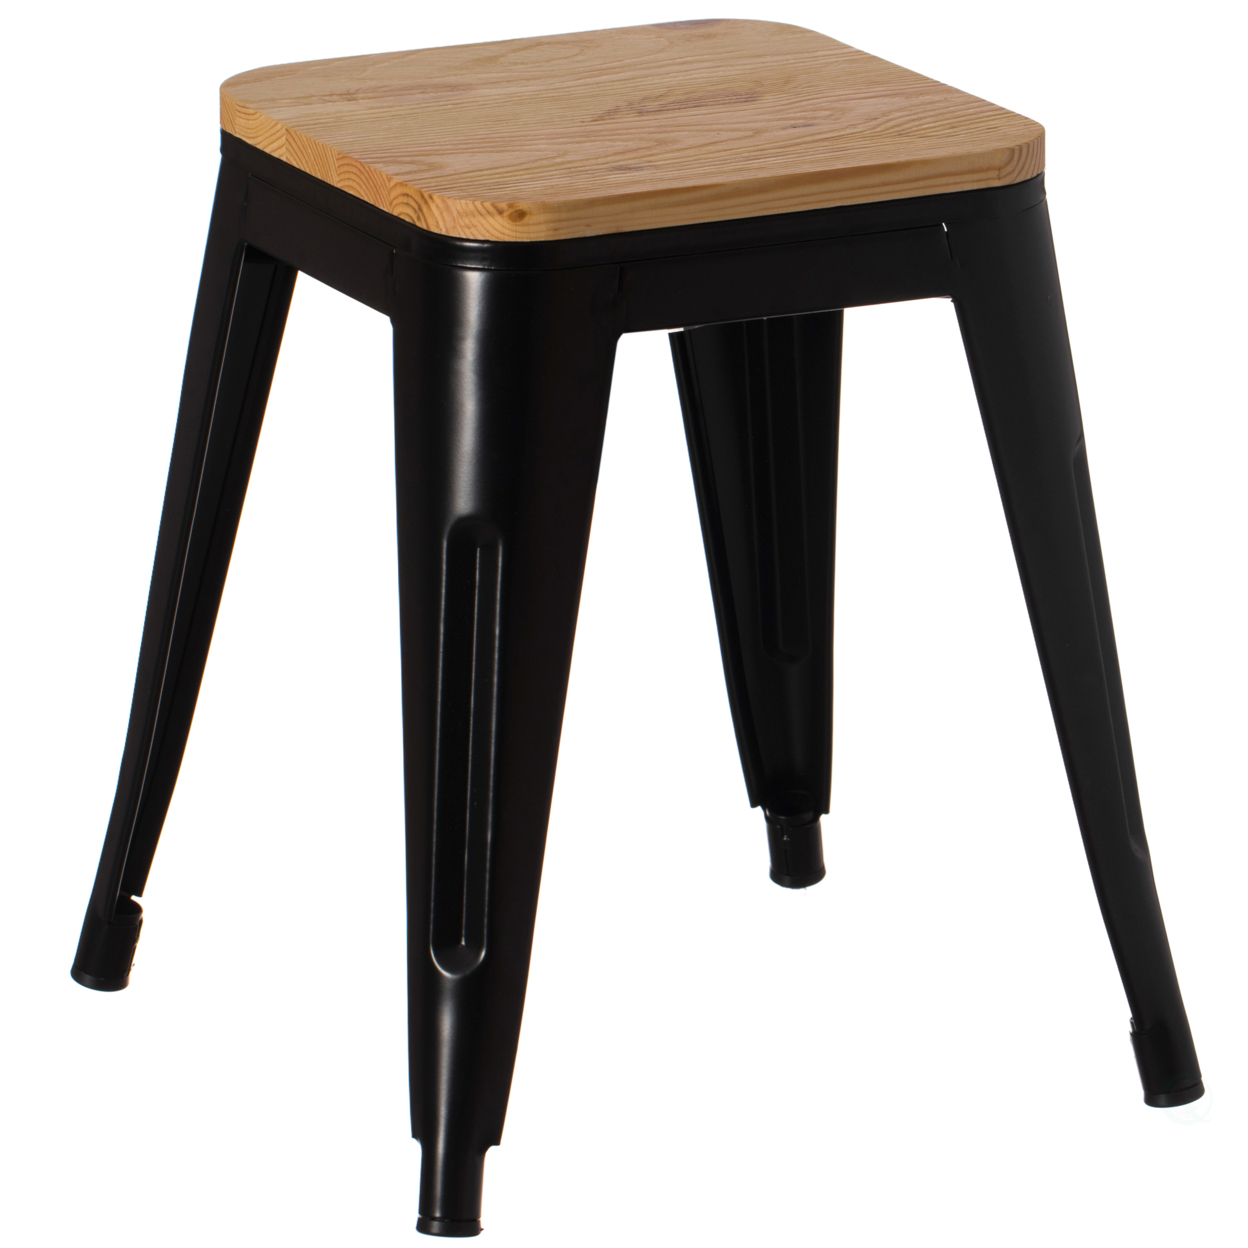 Decorative Accent Bar Stool For Indoor And Outdoor, Wooden Brown And Metal Black - Large